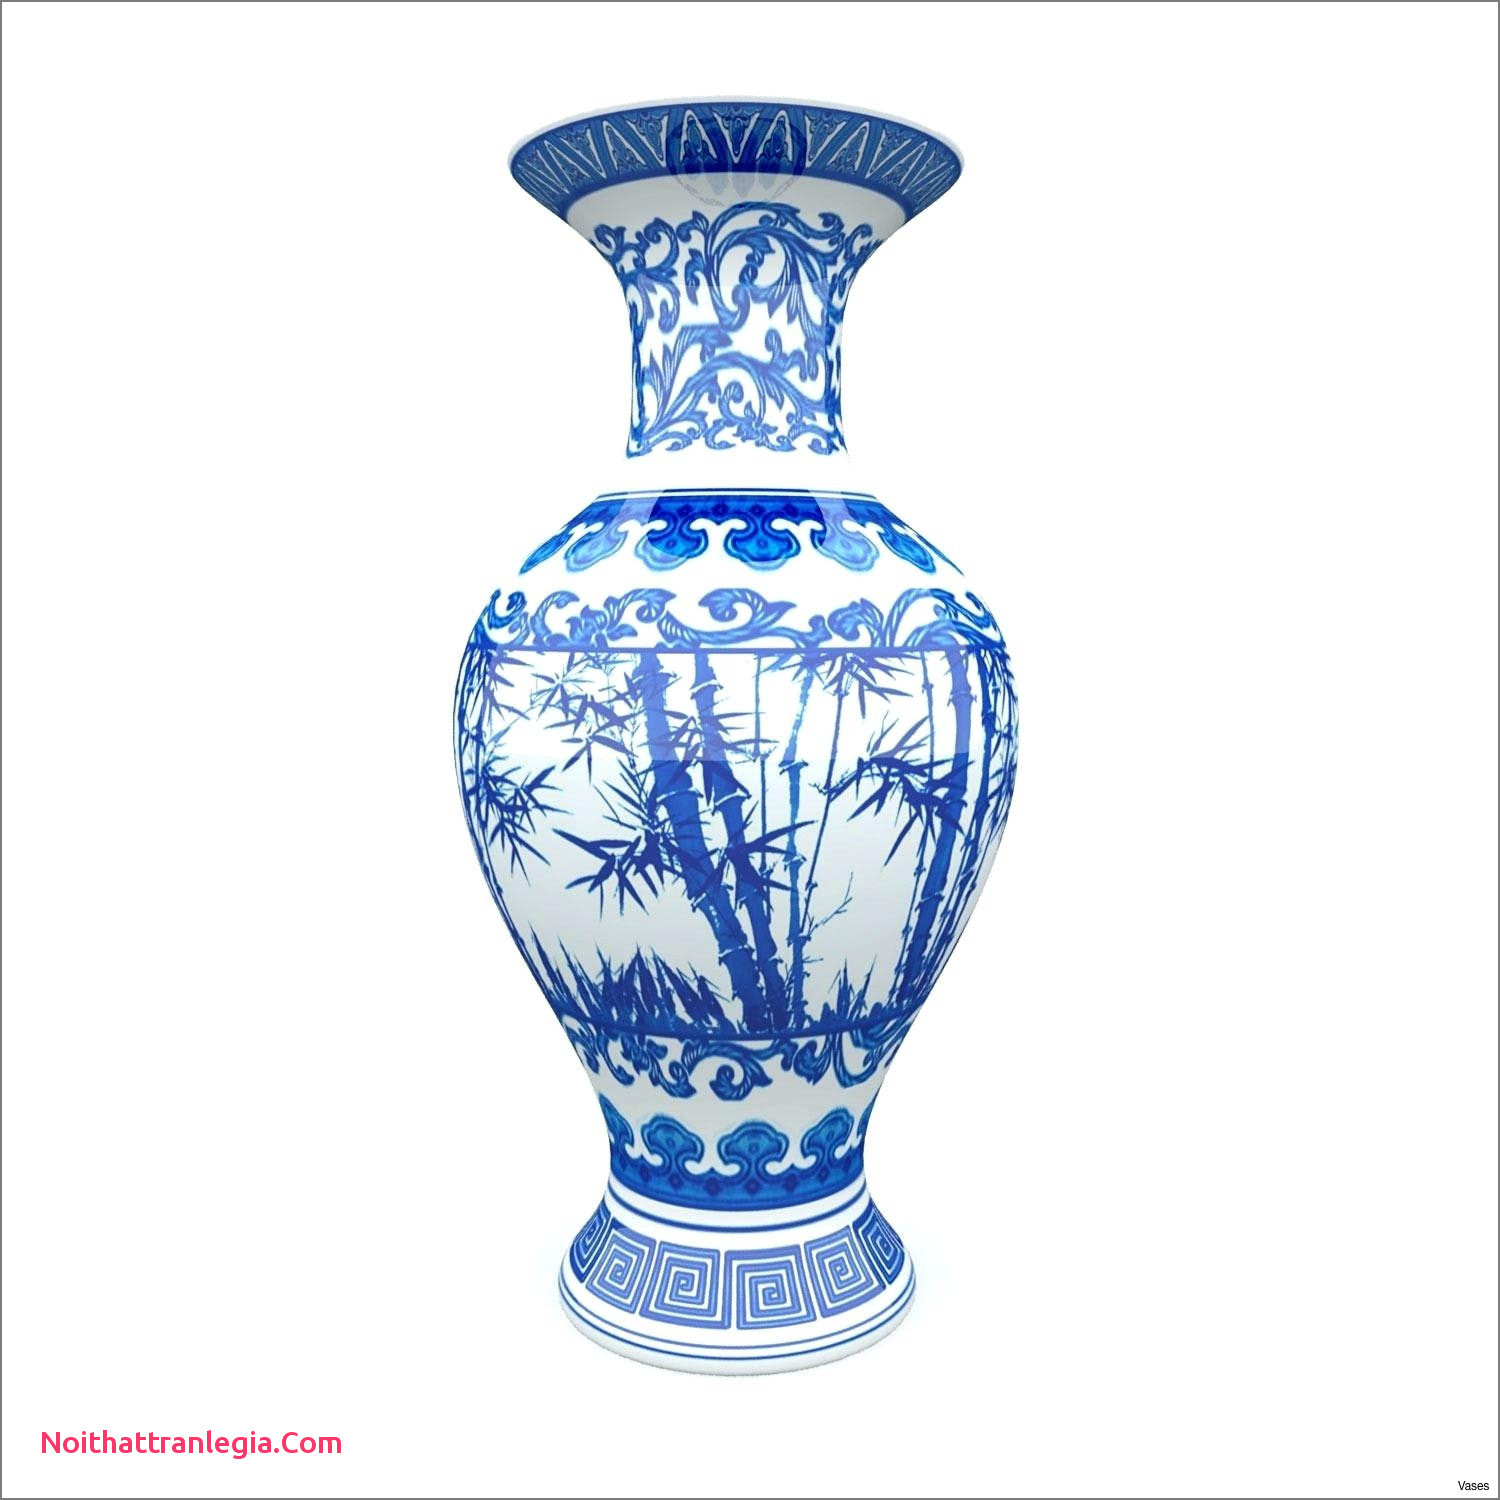 16 Famous Blue and White Porcelain Vases for Sale 2024 free download blue and white porcelain vases for sale of 20 chinese antique vase noithattranlegia vases design pertaining to antique table lamp markings new chinese dynasty vase markings lamp base ceramic